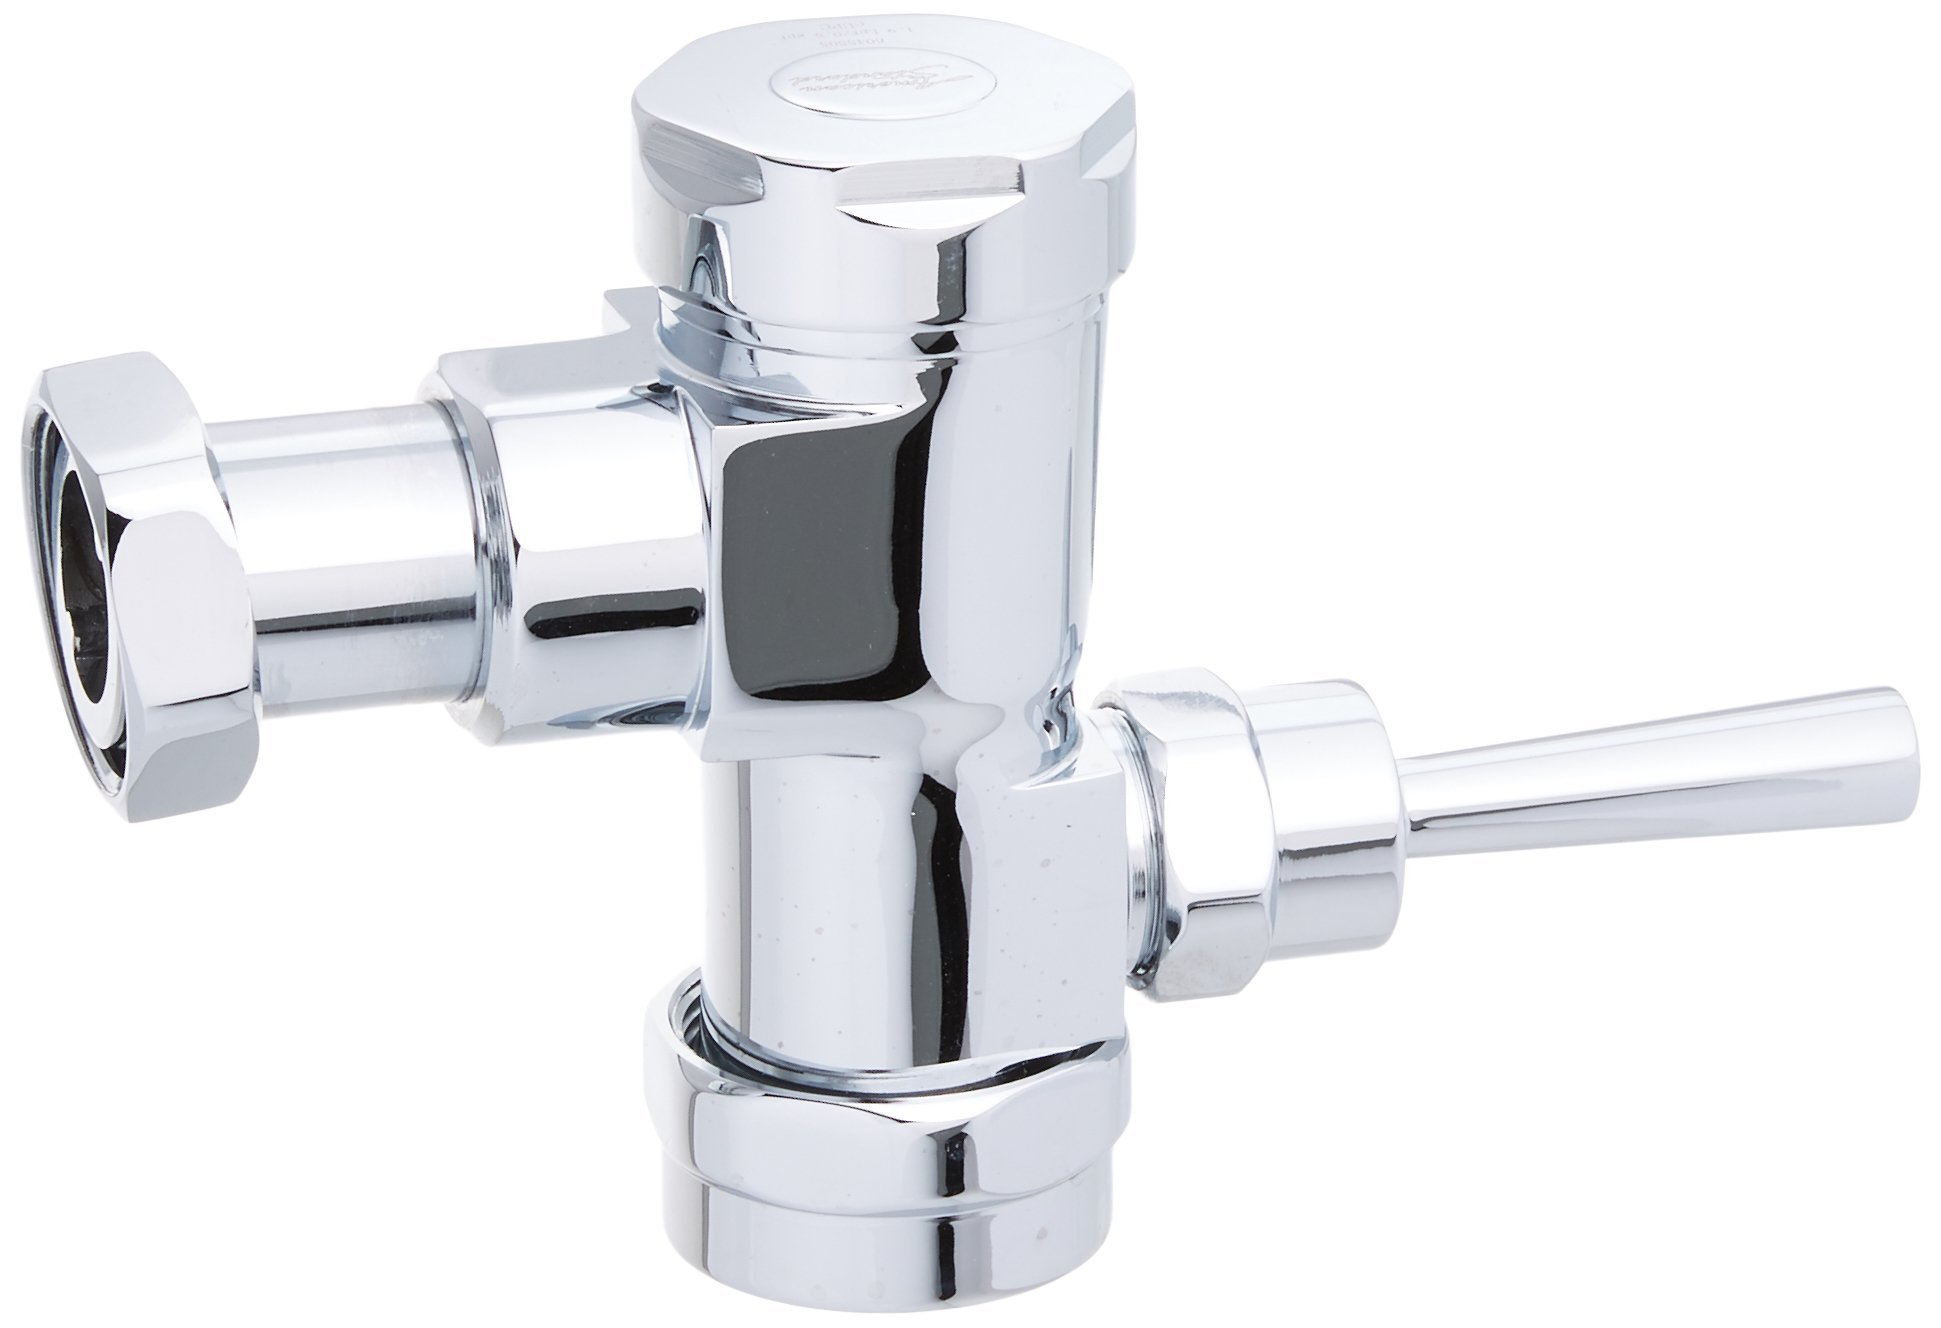 American Standard 6045.505.002 Exposed Manual Flowise 0.5 Gpf Urinal Flush Valve Only for Retrofit, Polished Chrome